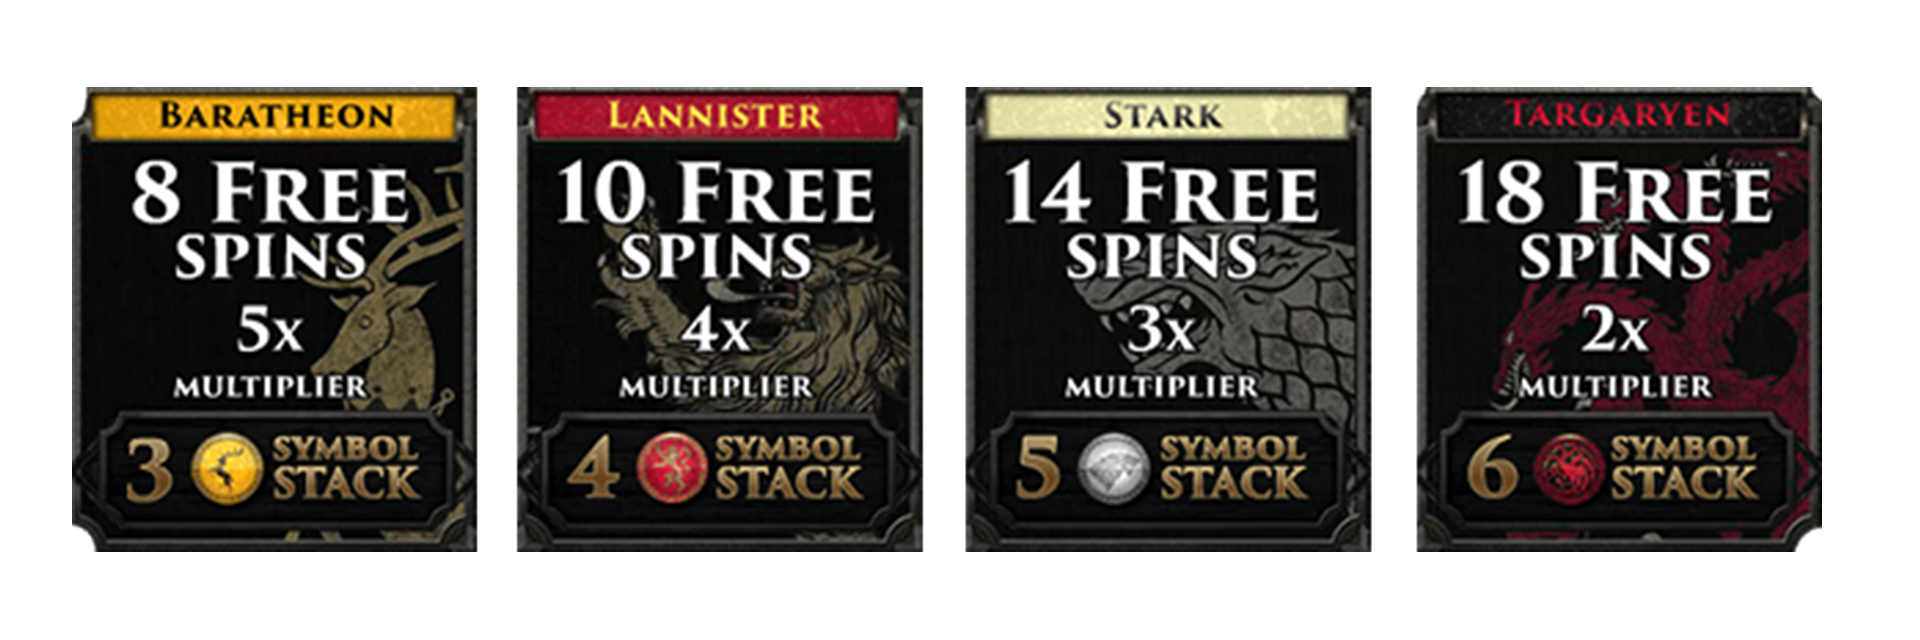 Game of Thrones slot machine free spins.